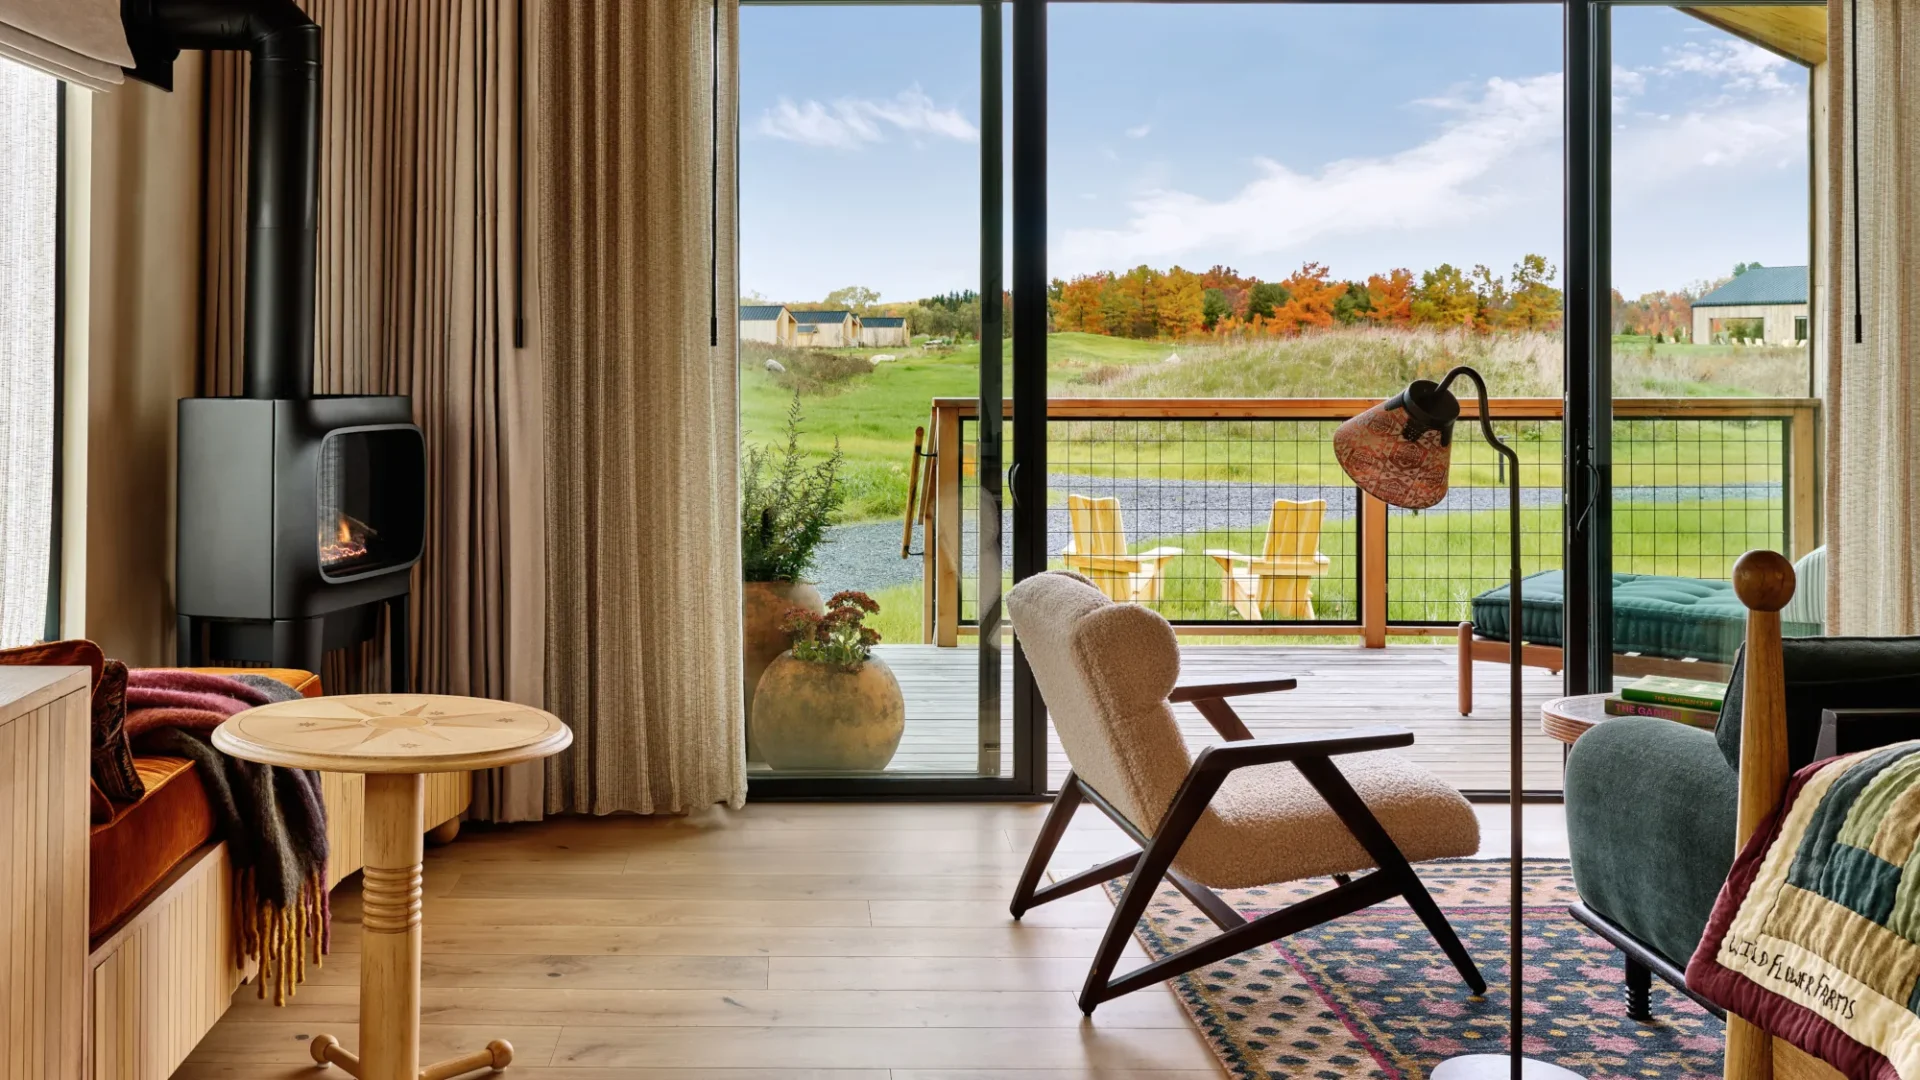 A view from a cottage at the Wildflower Resort, showing furniture, a fireplace, and a floor-to-ceiling window showing off the view